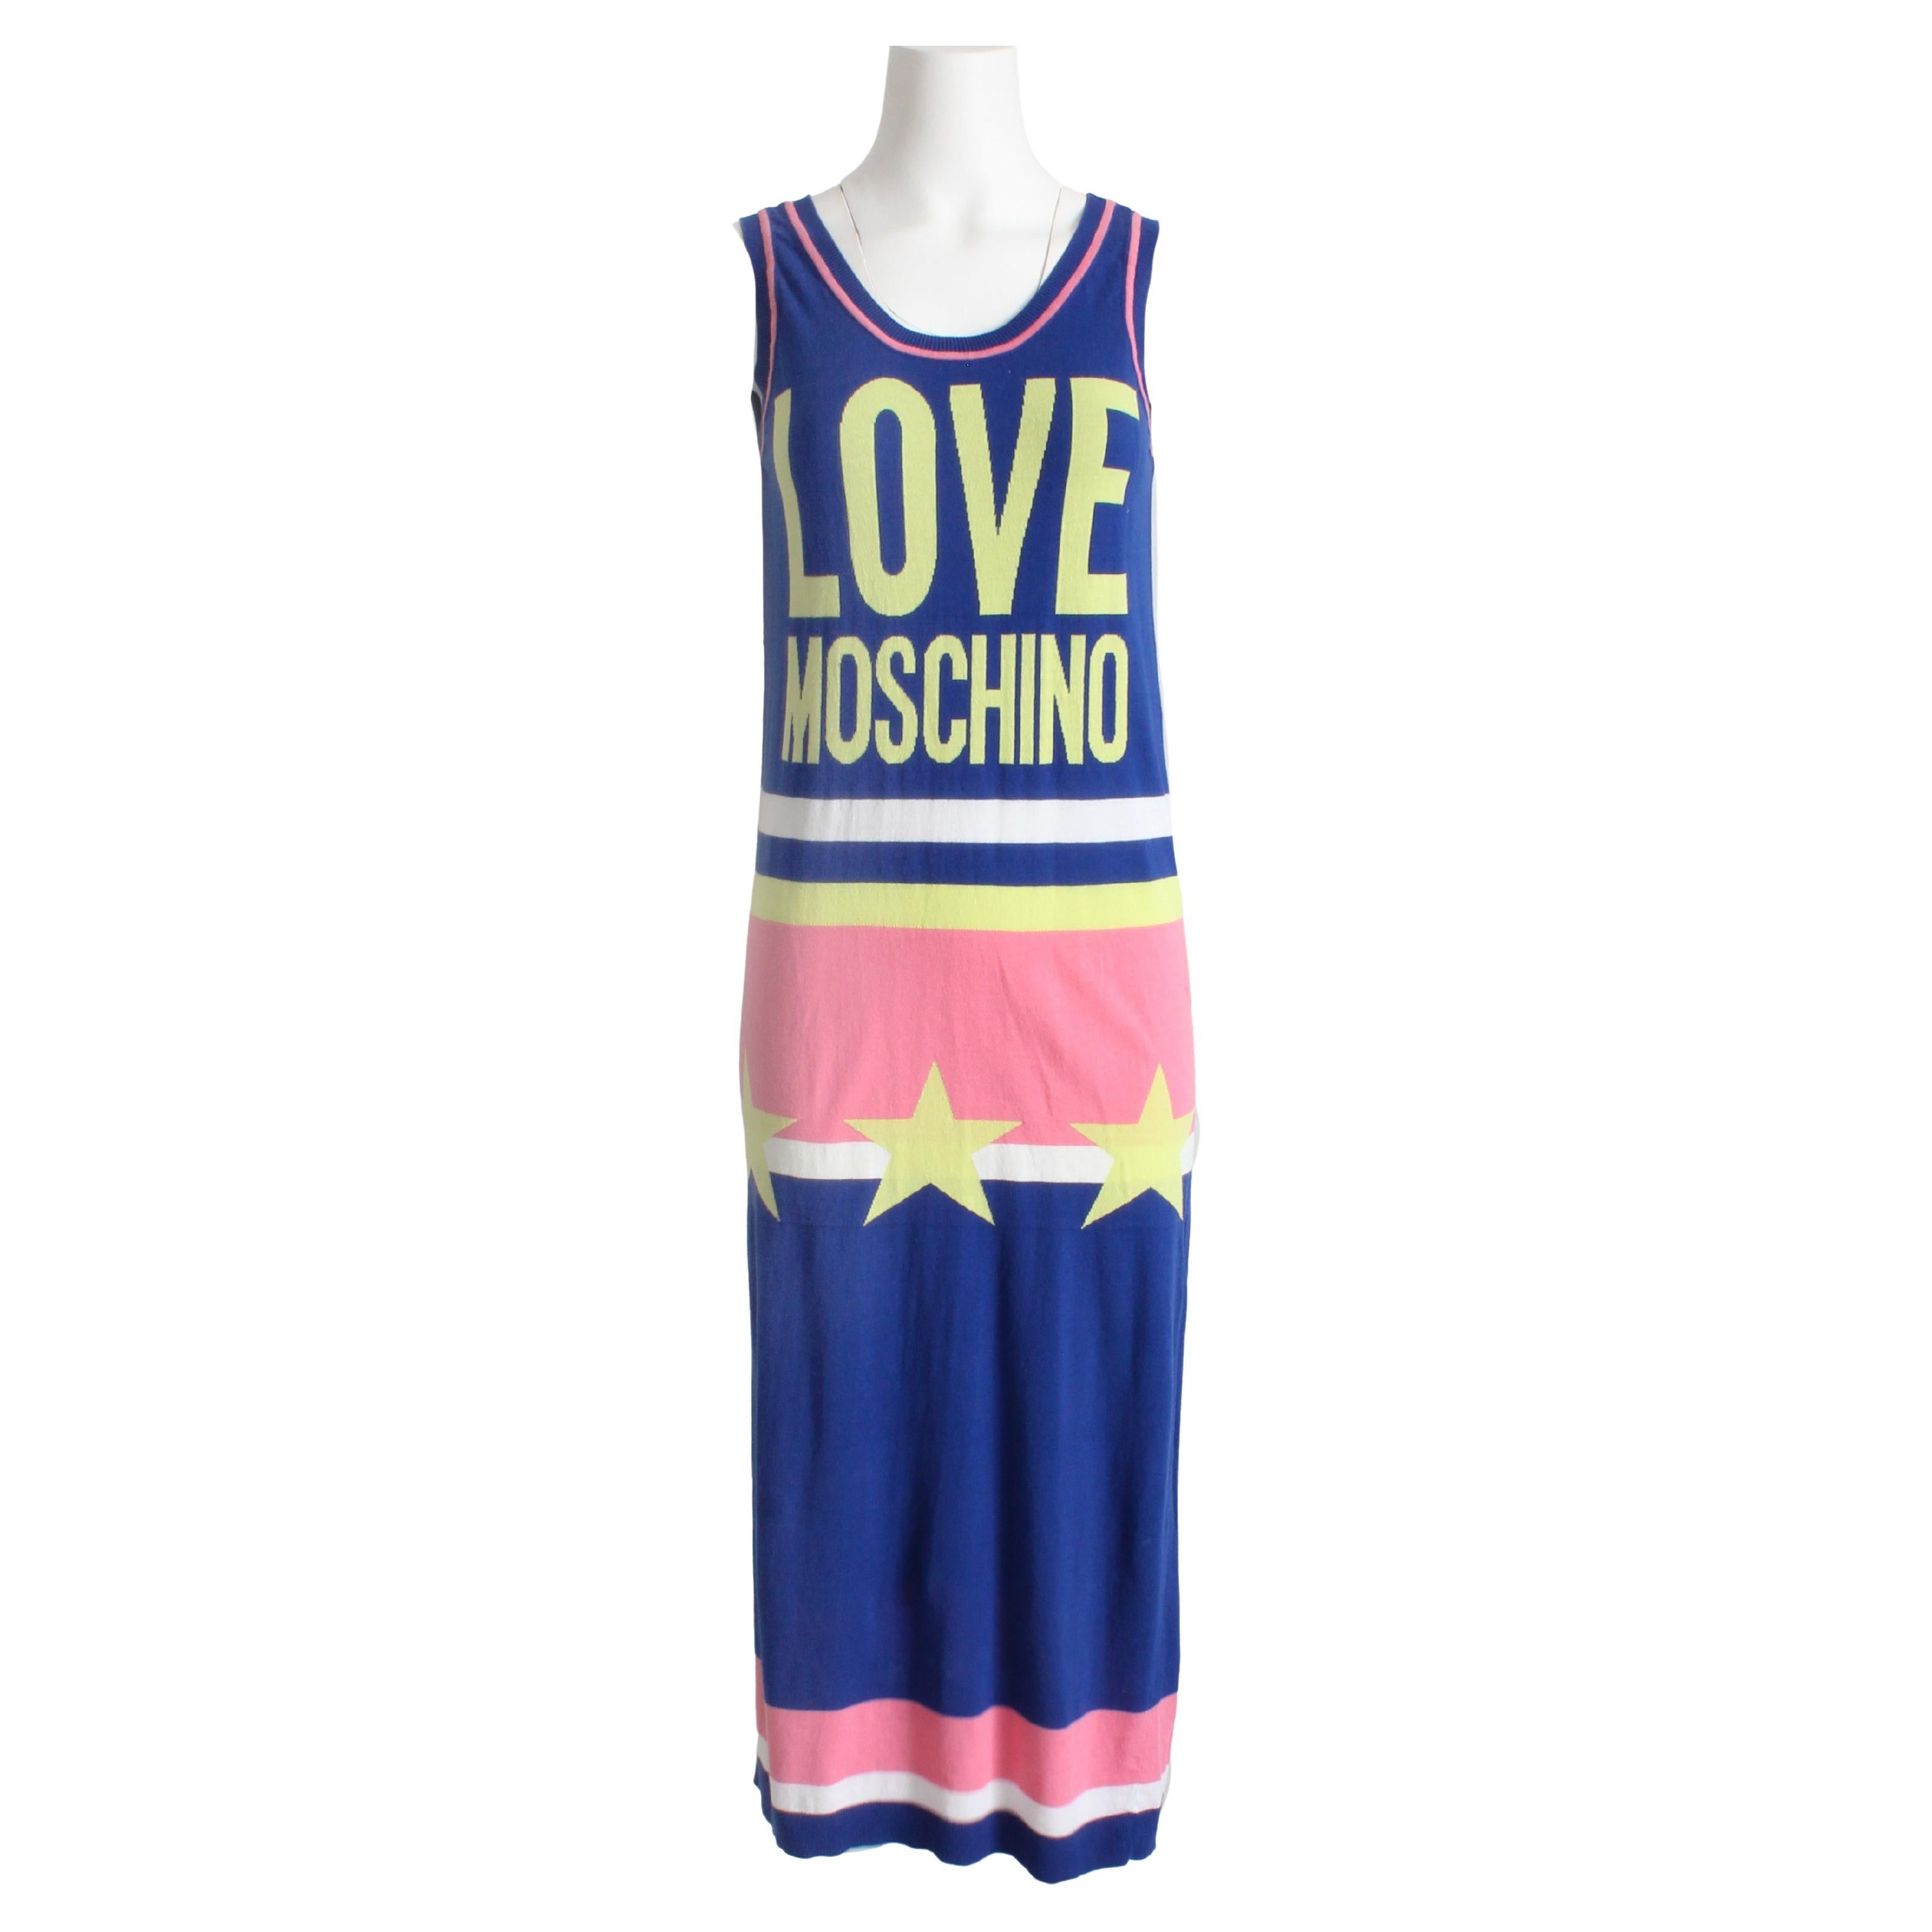 Moschino Maxi Dress Color Block All Stars Pink Blue Cotton Knit Sweater Sz 2 For Sale